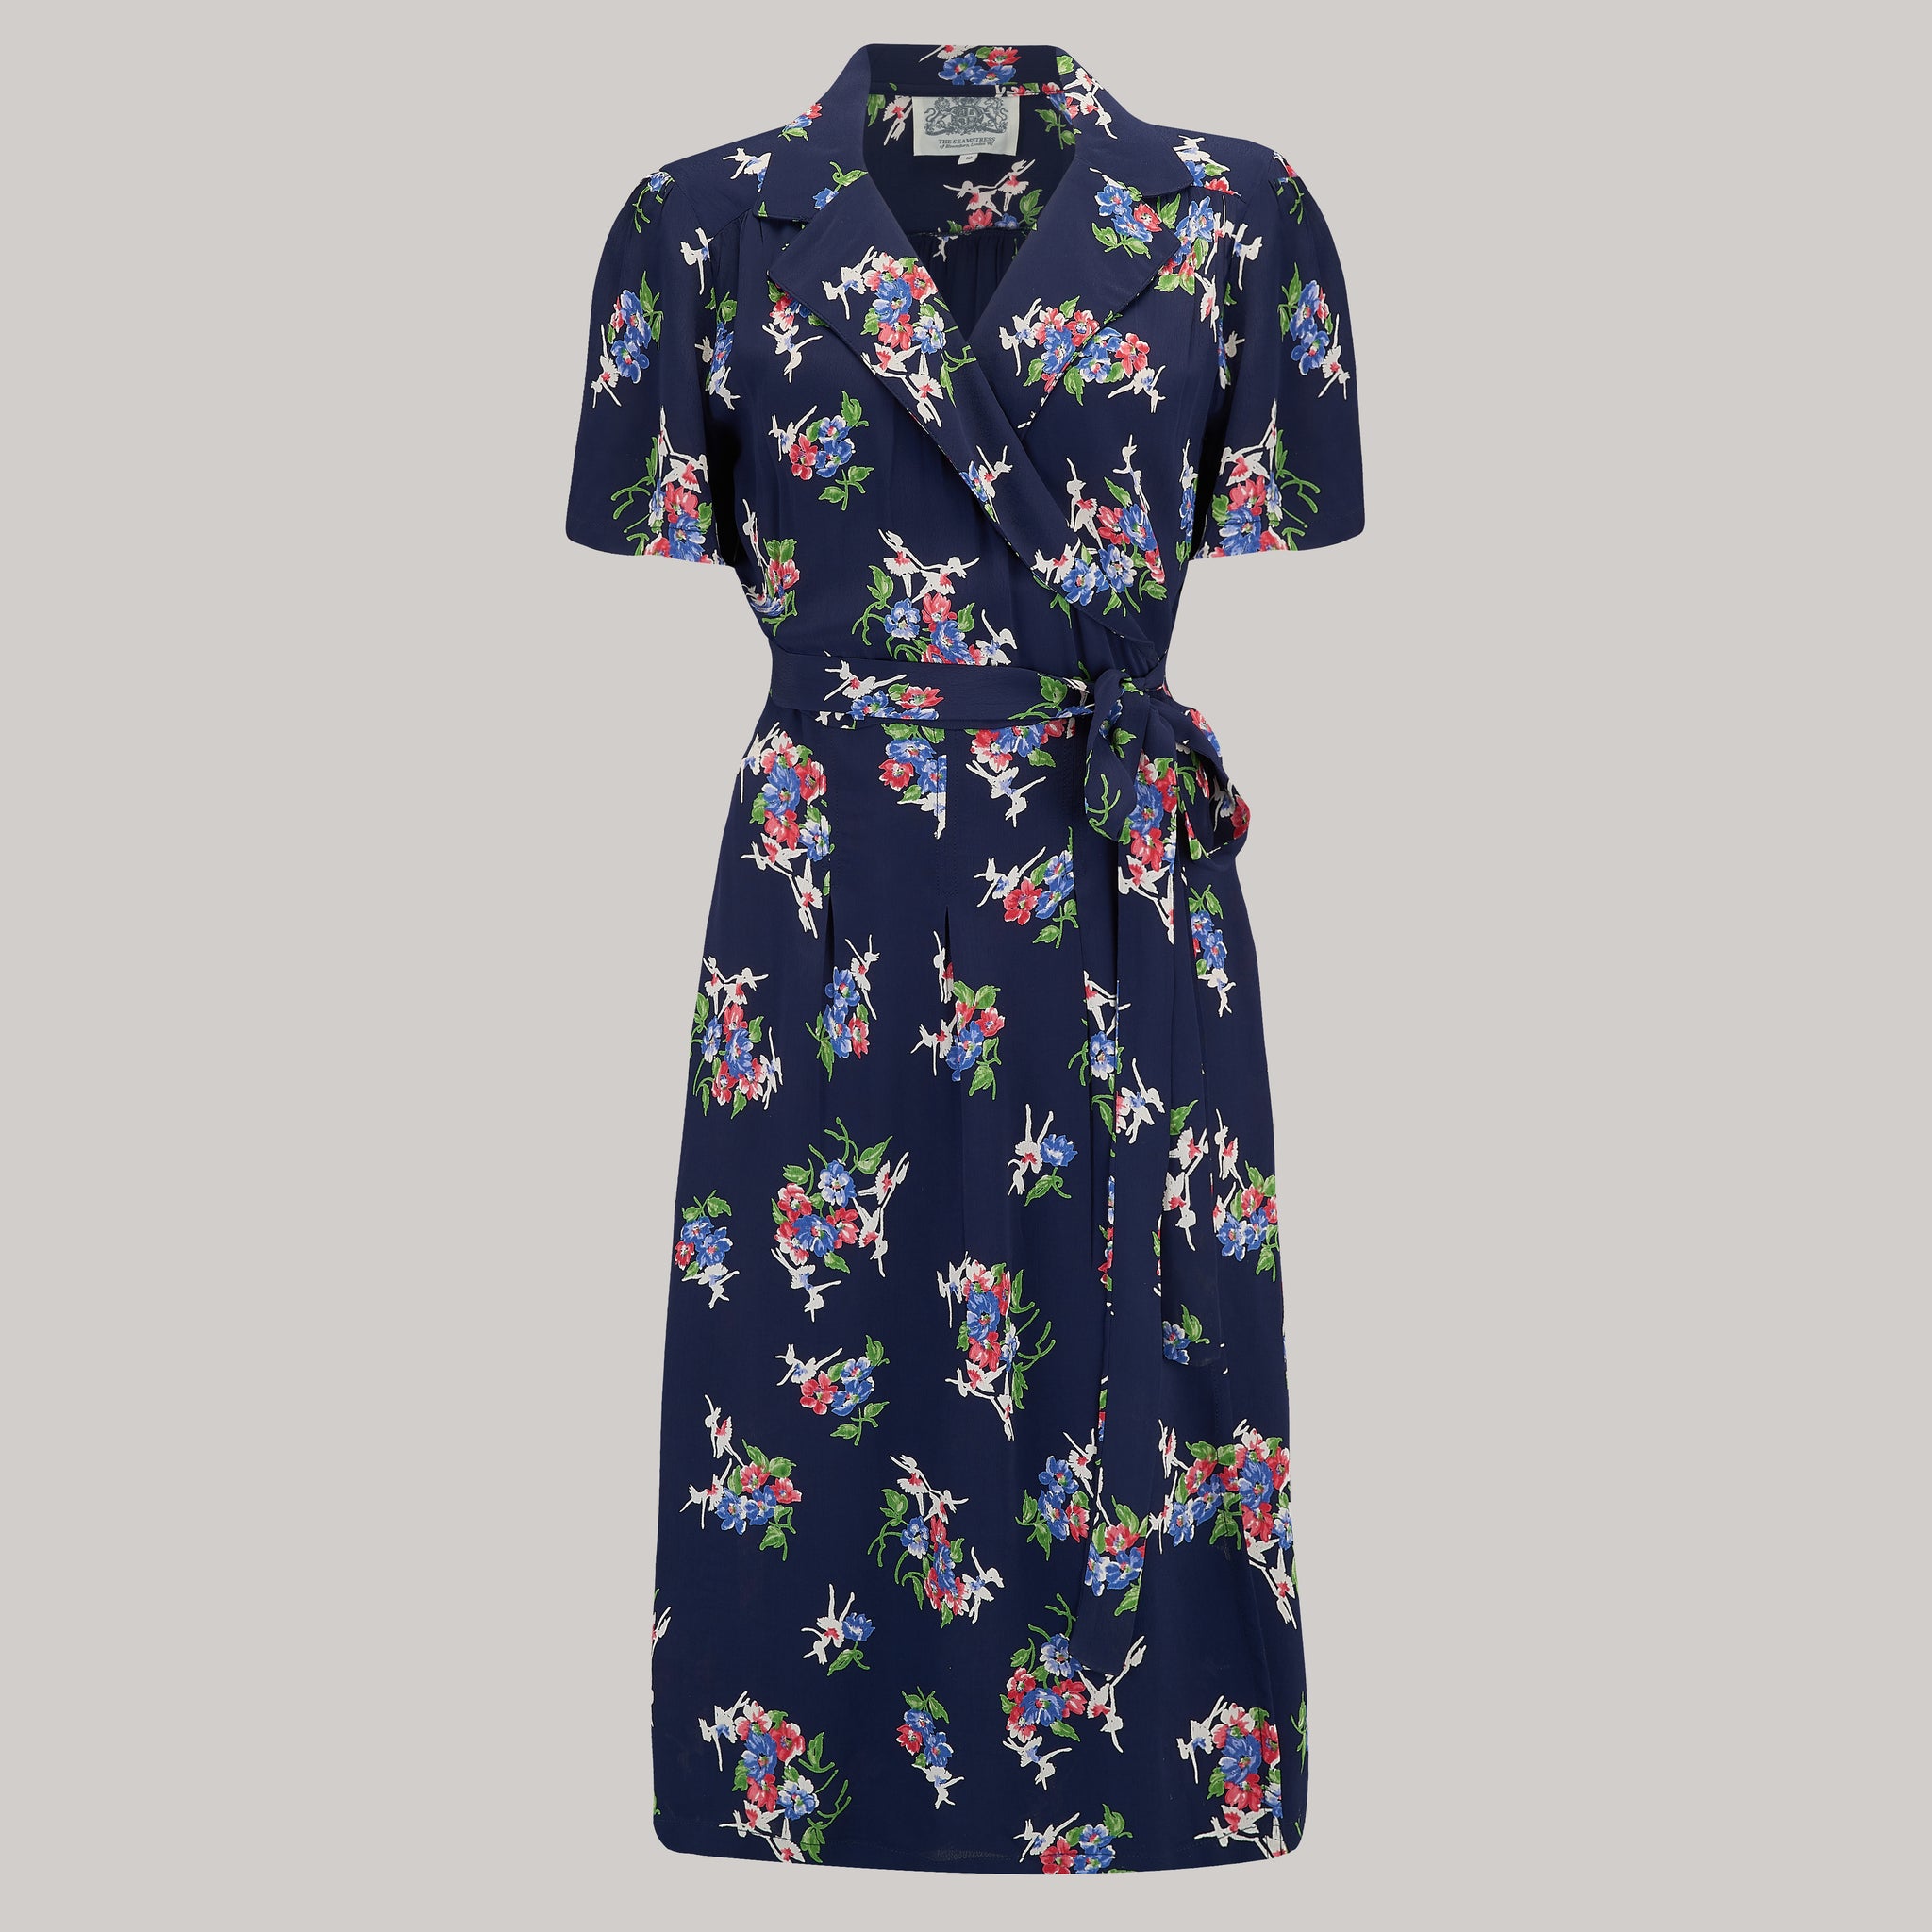 "Peggy" Wrap Dress in Navy Floral Dancer Print, Classic 1940s True Vintage Inspired - True and authentic vintage style clothing, inspired by the Classic styles of CC41 , WW2 and the fun 1950s RocknRoll era, for everyday wear plus events like Goodwood Revival, Twinwood Festival and Viva Las Vegas Rockabilly Weekend Rock n Romance The Seamstress of Bloomsbury